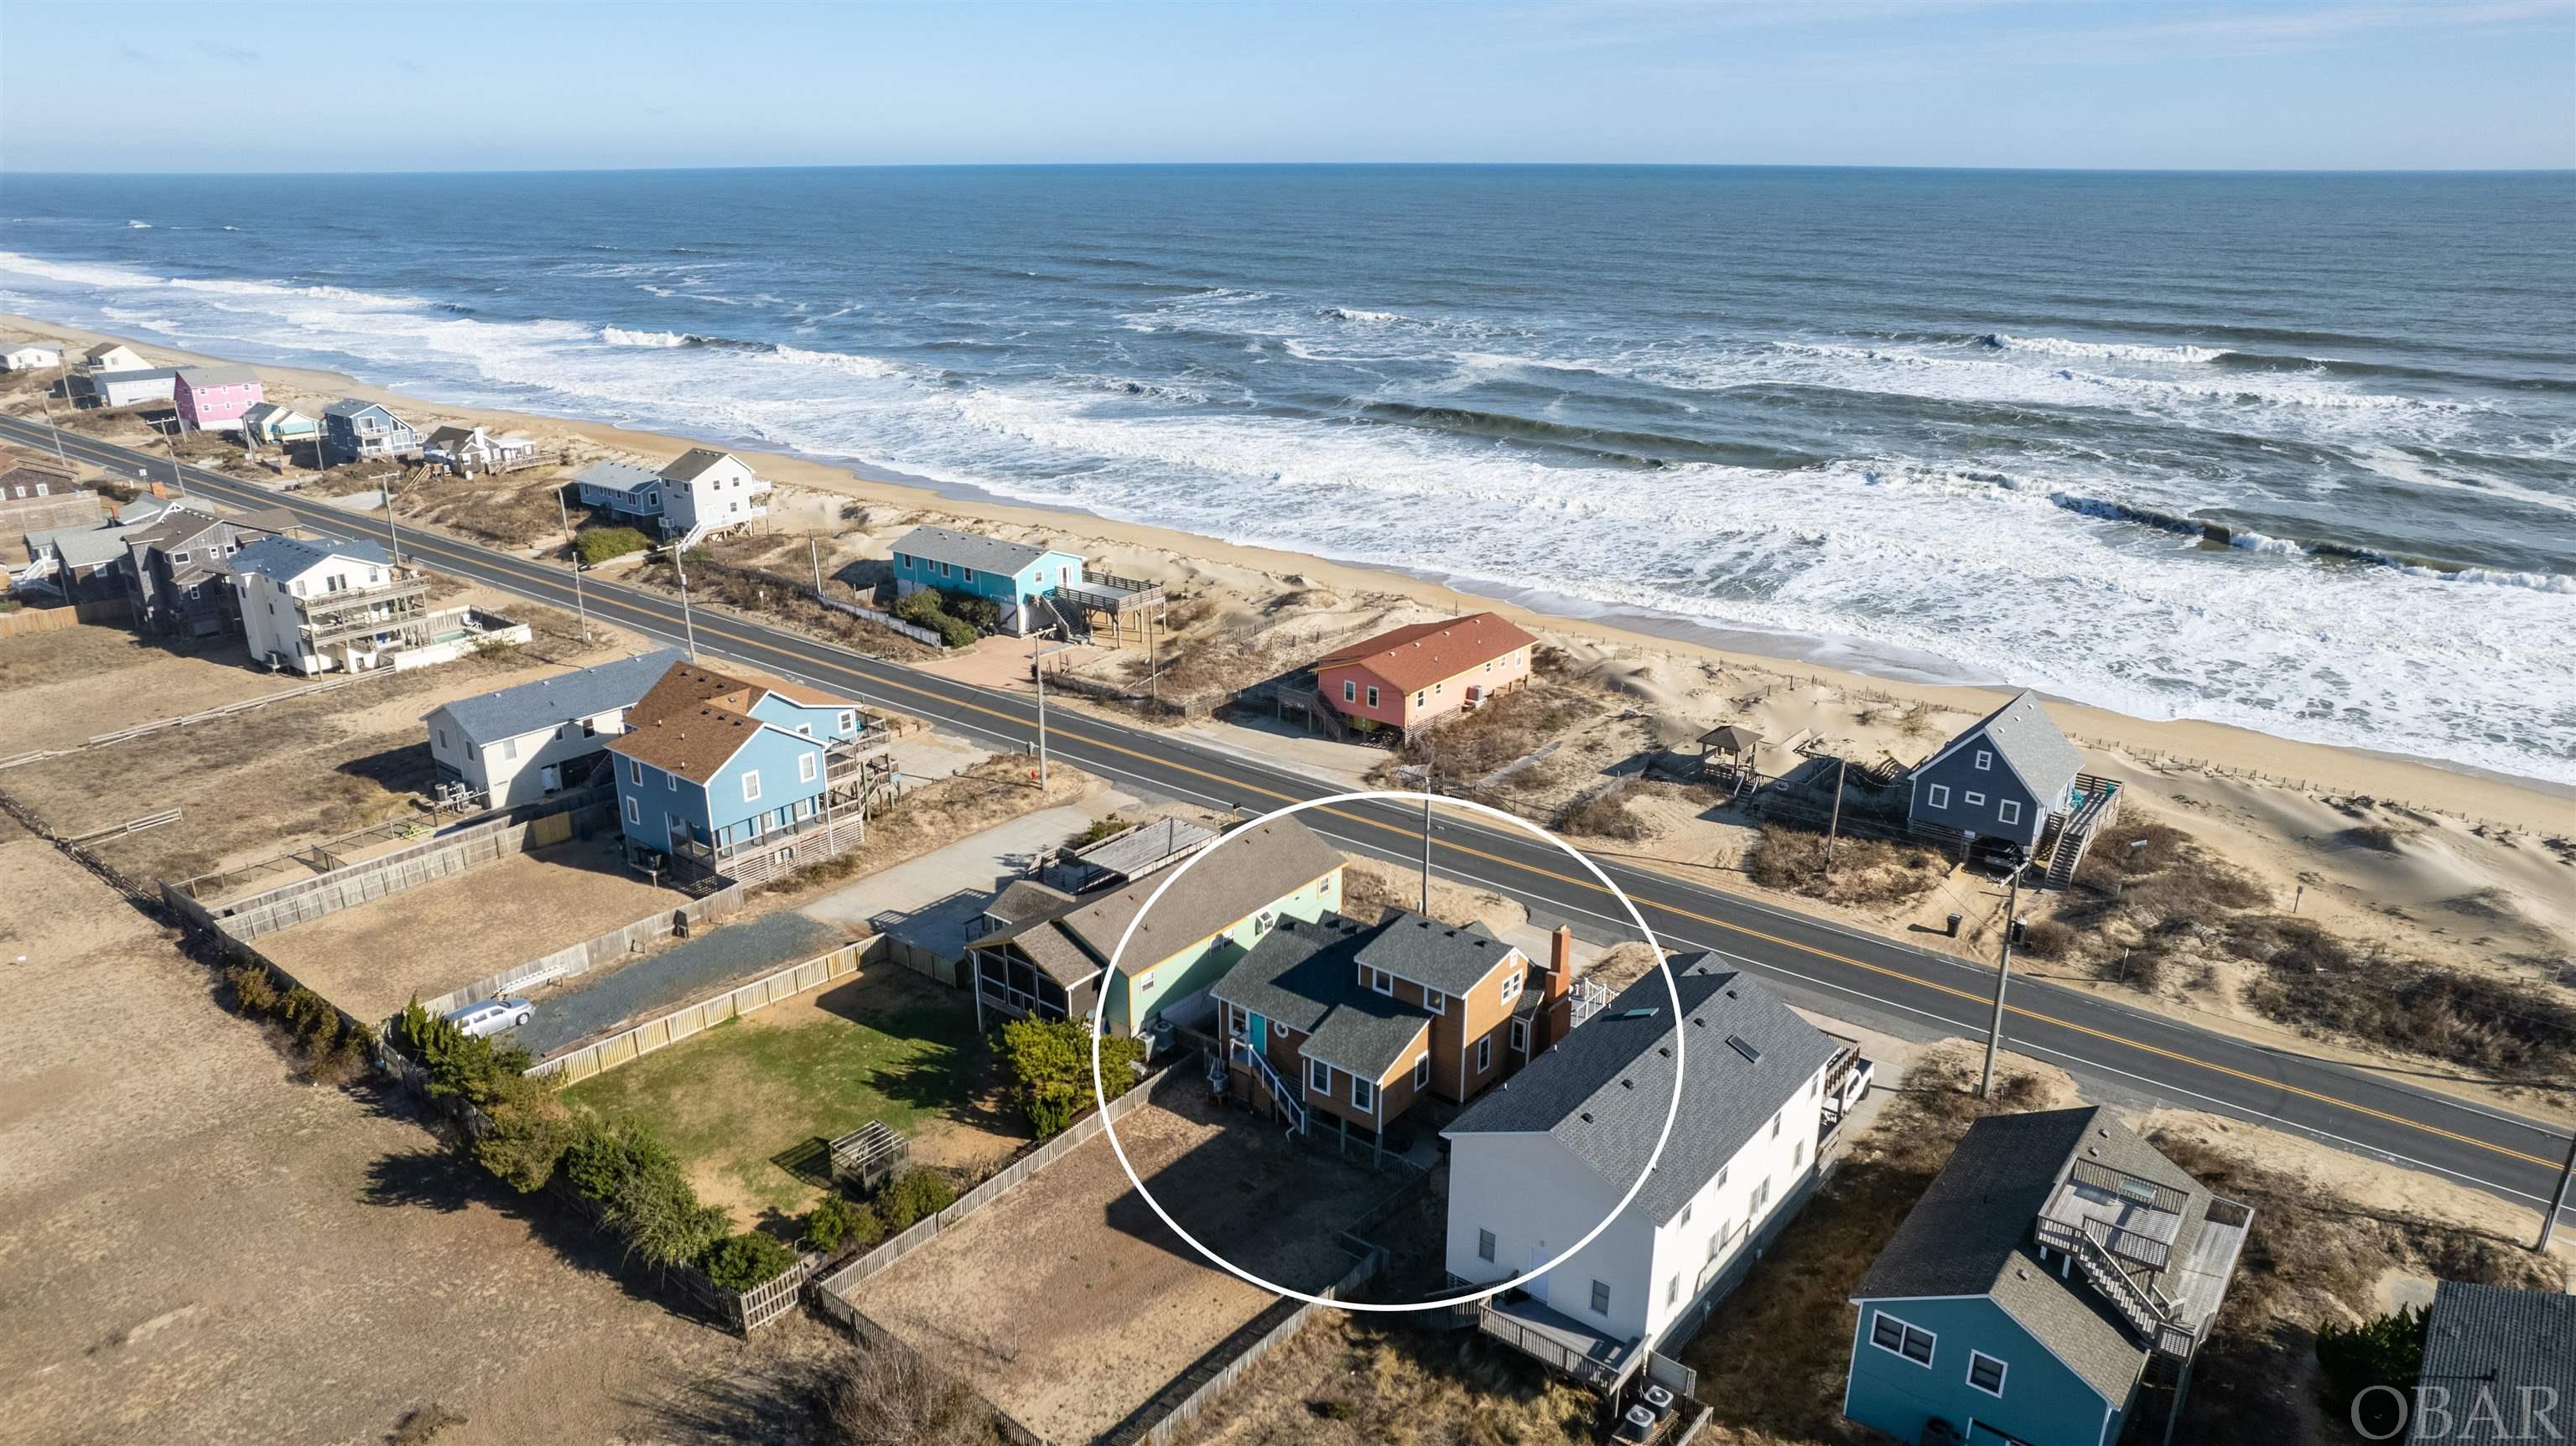 Enjoy Oceanfront views that will never change and great beach access without the risk of being right on the Oceanfront! 'The View Cottage' is truly one of a kind and has been renovated over the years, keeping its charm and character while adding modern conveniences.  The effective age is much newer than 1950, and it sleeps like a 4 bedroom (sleeps 10!).  The large ocean view window and sliders in the living area fill the space with tons of natural light, and you will love all the details throughout like the bead board ceilings, original doors, and gas fireplace with tongue and groove wood work.  The kitchen was remodeled by Ken Green and showcases Geos recycled glass counters, a wet bar with wine cooler, glass front cabinet doors, and a custom pull out pantry.  The main level also features a Queen primary bedroom with en-suite bath, a double bunk room, a full hallway bathroom, custom built ins, a 500 game arcade, and a laundry area.  Relax on the brand new oversized front deck with new hot tub where you will experience beautiful ocean views, sunrises, and gorgeous moon lit nights over the ocean. You will be so close to the ocean that you may see dolphin right from the front deck on any given day!  The 2nd level offers 2 additional bedrooms (Queen and Full) that share a hallway half bath.  You will find plenty of storage with lots of closet space throughout, and a pull down attic with flooring and Thermax insulation.  The front Ocean view sun deck offers plenty of seating with quality polywood furniture, and the exterior carport area provides a great shaded additional outdoor living space with a sofa, table and chairs, picnic table, and outdoor shower.  Hurricane shutters on the front windows and doors offer added built-in protection when needed. The fenced in backyard is perfect for lawn games, and you will find everything you need in the utility shed from corn hole boards to beach gear and a beach cart to carry everything over to the beach!  You will fall in love with this adorable cottage that offers all the comforts of home and an absolutely ideal location in Kitty Hawk.  You will never lose your Ocean views as the vacant Oceanfront lots are not buildable.  Over 10% estimated gross rental return with up to $106K projected for the 2024 season!  Recent upgrades include a NEW exterior electrical service panel and new water heater '22, NEW smart tv's, and a brand NEW front and back deck with trex, NEW deck pilings, NEW hot tub, NEW fortified roof, and NEW main level heat pump in '23. The views are even better in person, and you cannot beat this location in Kitty Hawk!